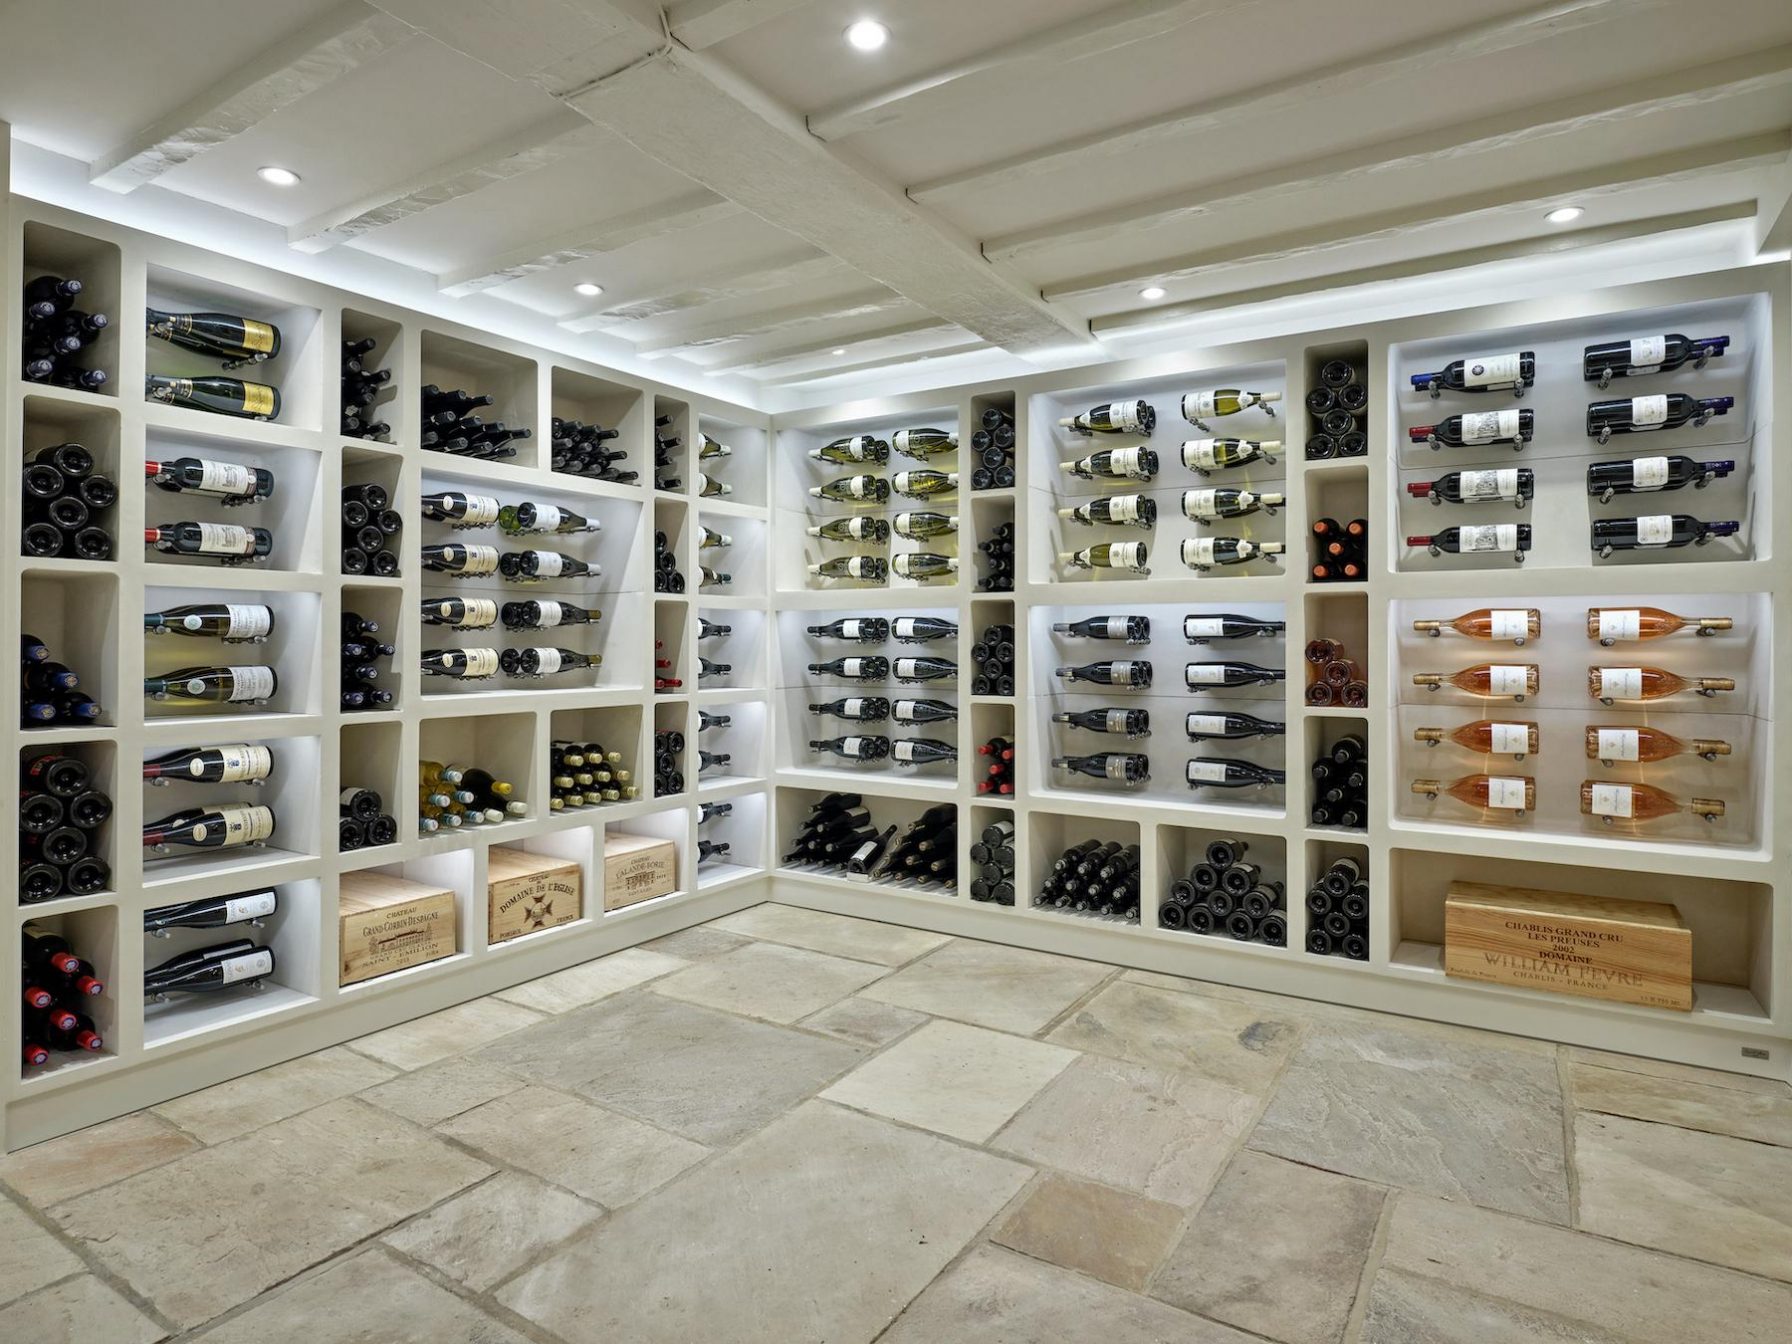 Are You Embarrassed By Your Easy Cellar Review Skills? Here's What To Do